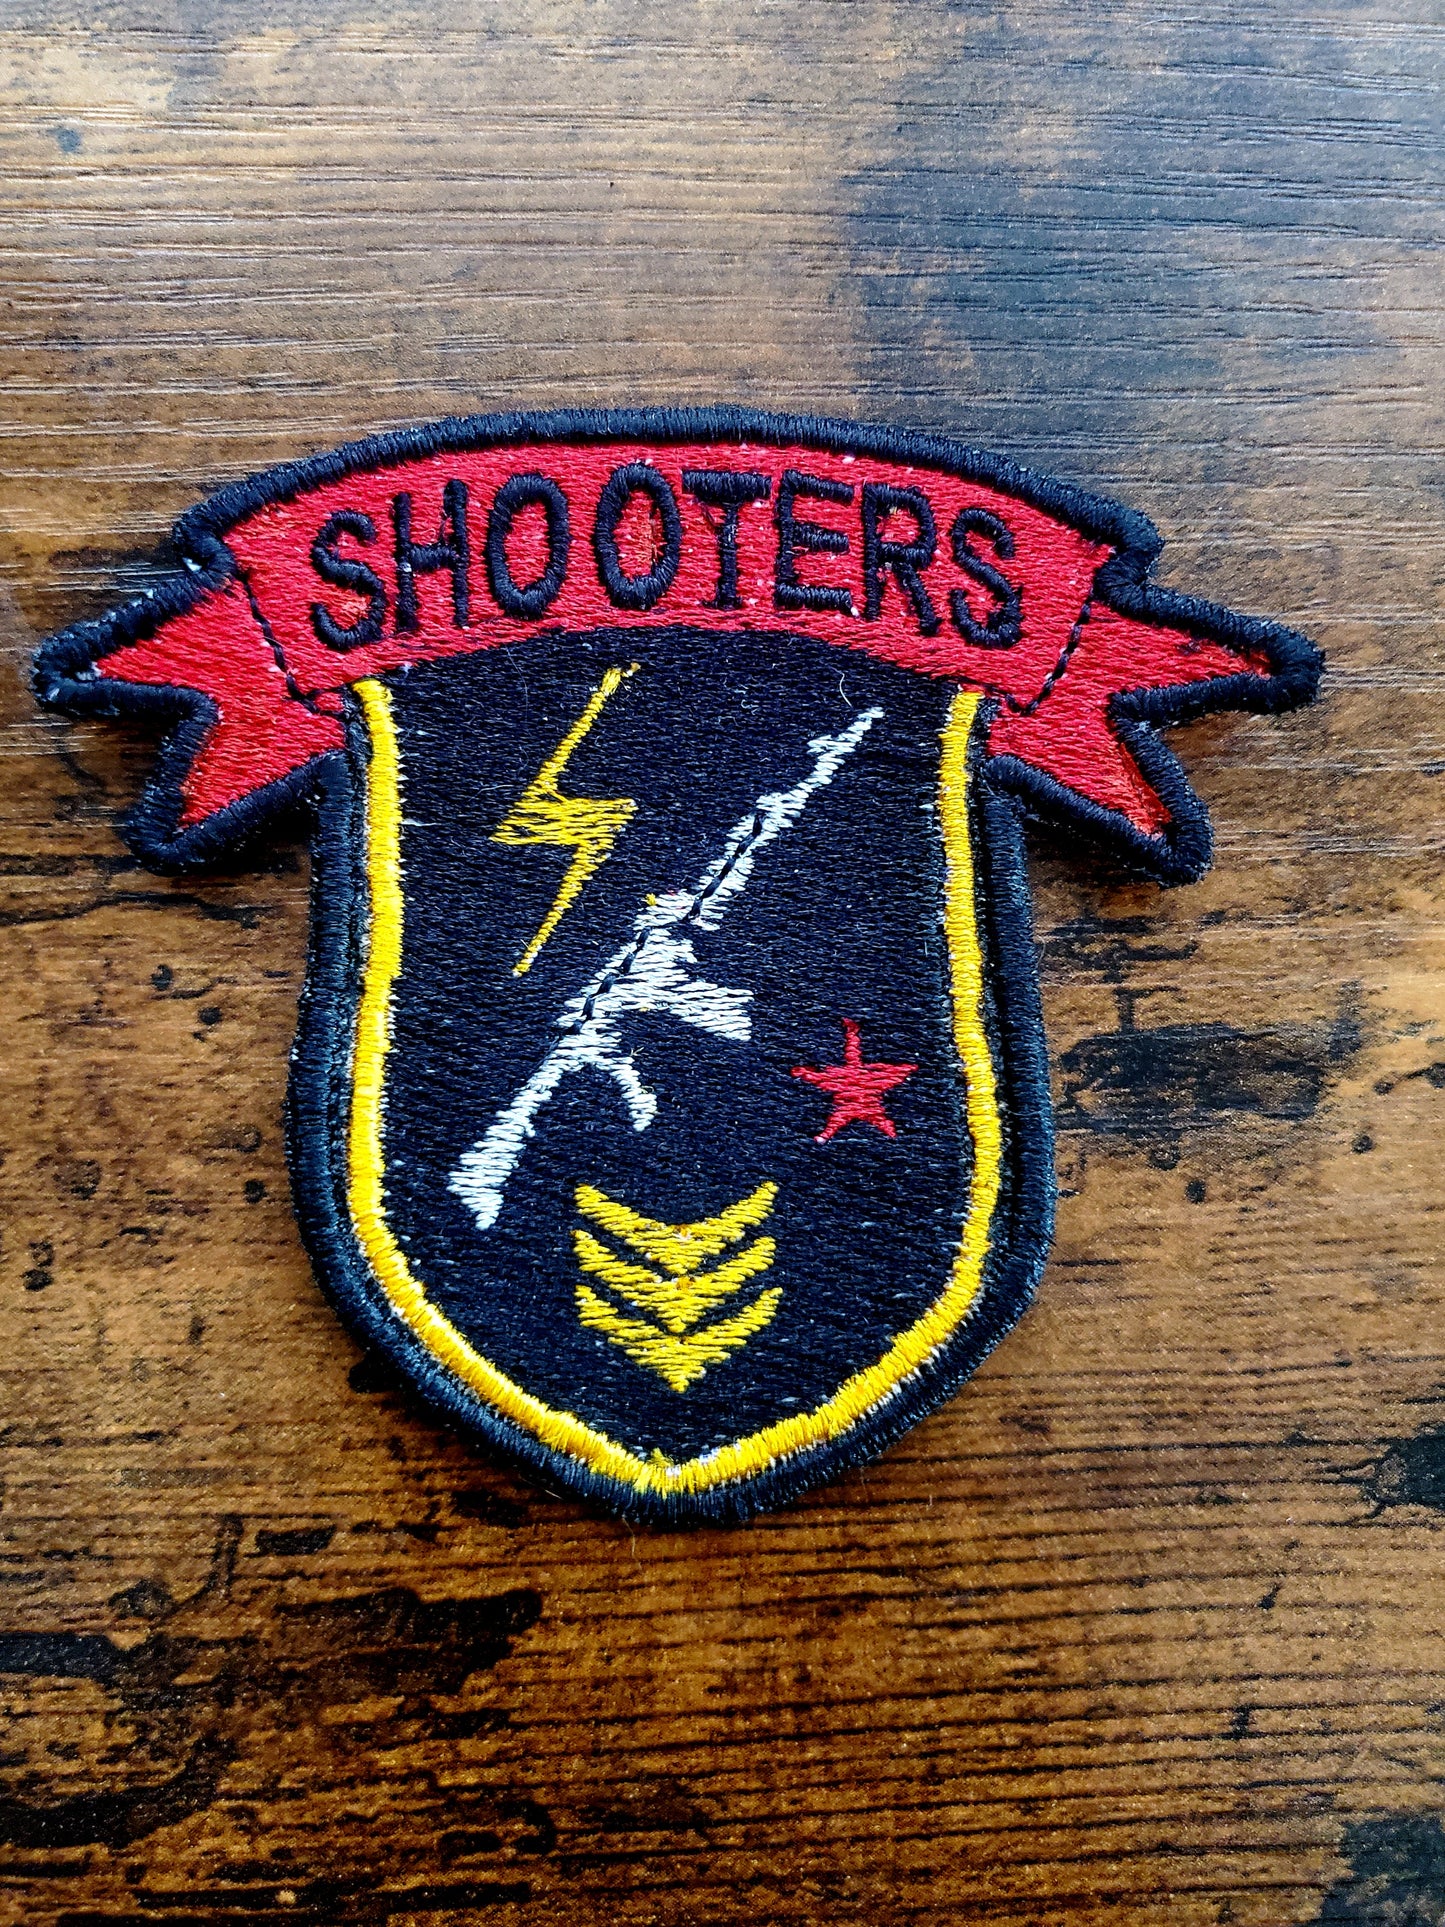 Shooters Military Patch